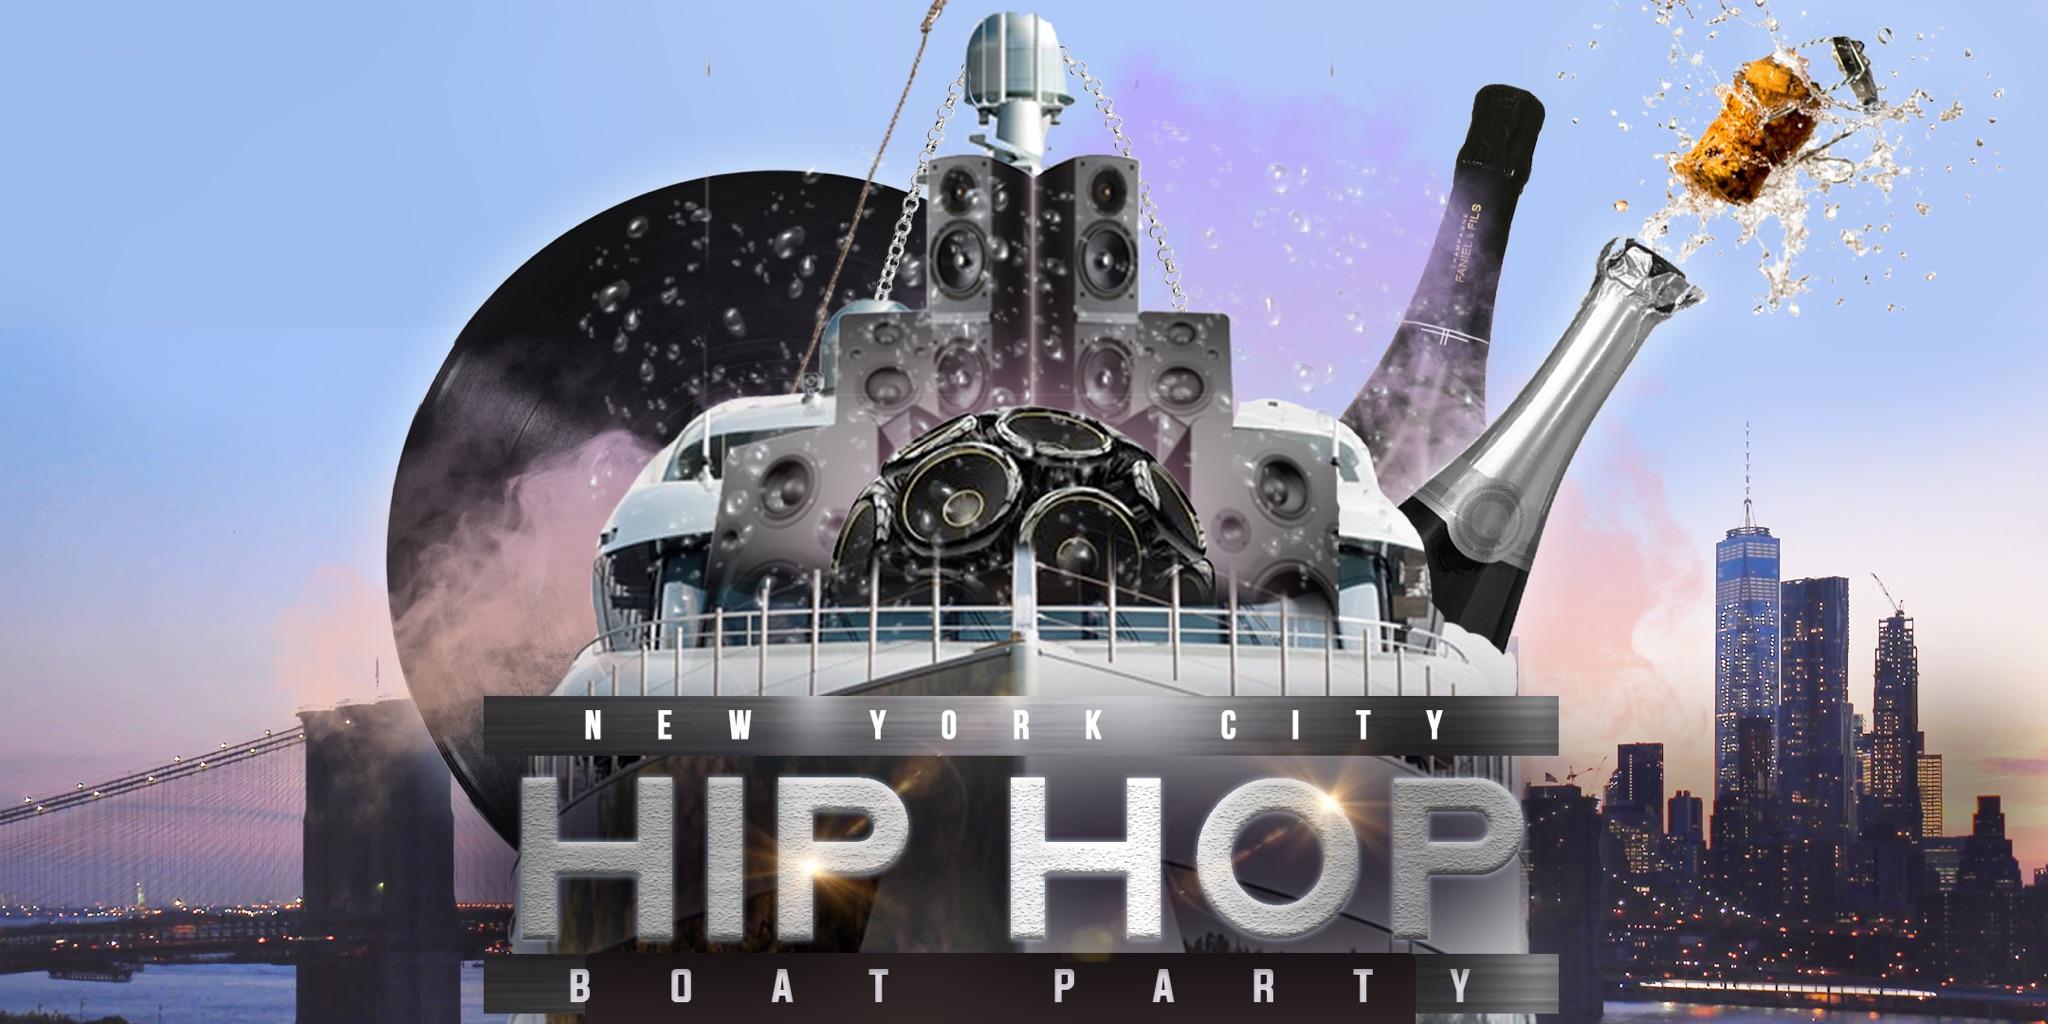 The #1 HIP HOP & R&B Boat Party NYC Yacht Cruise: Saturday Night - 17